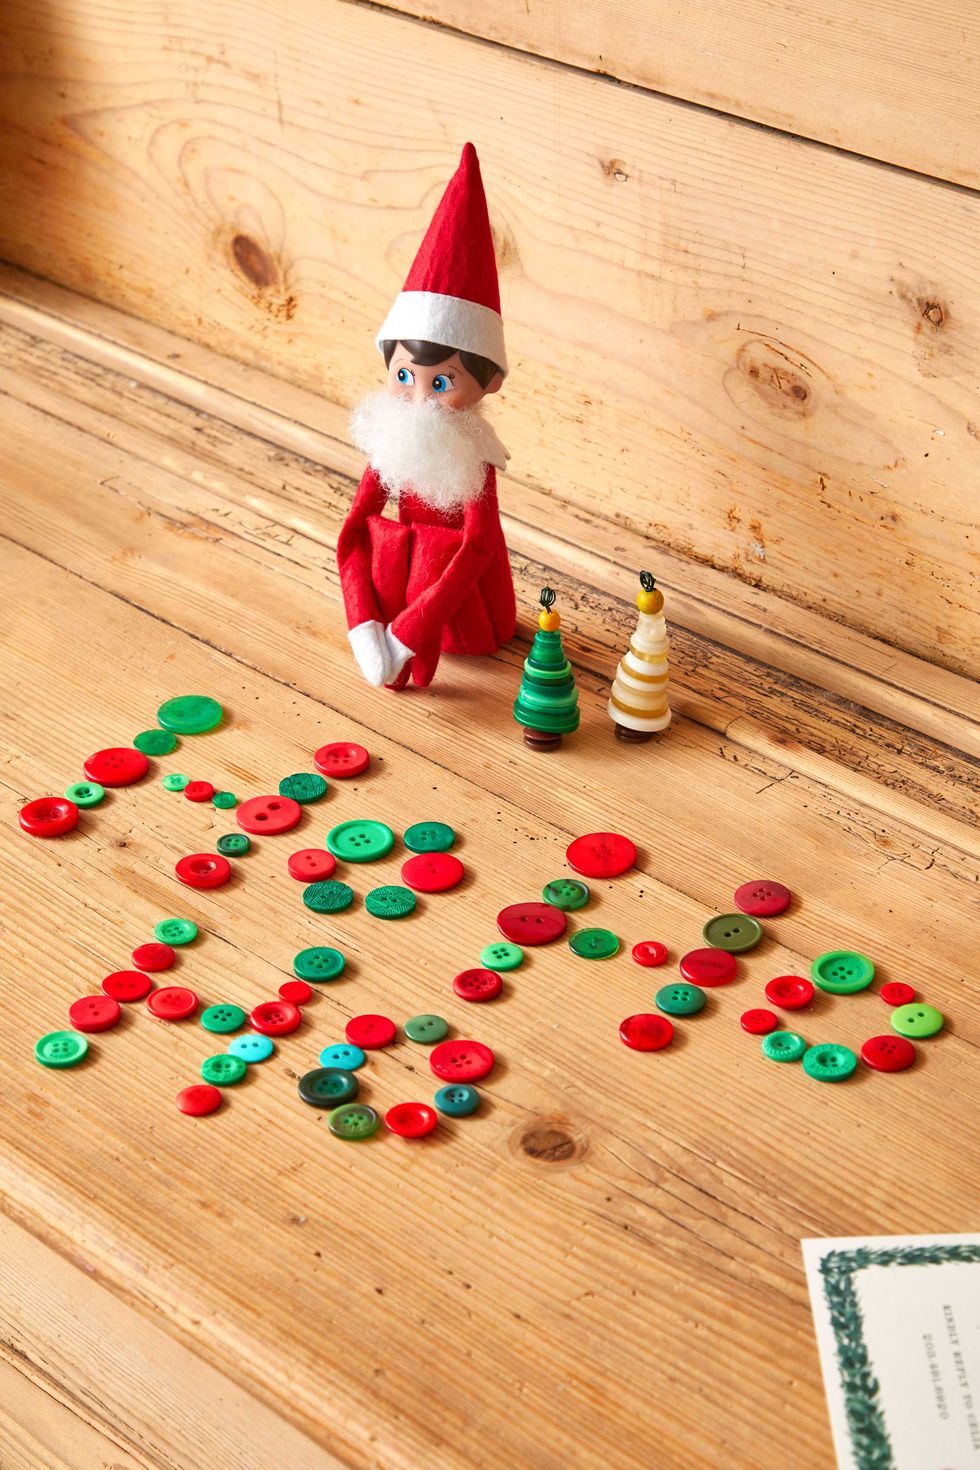 Elf on the shelf with buttons